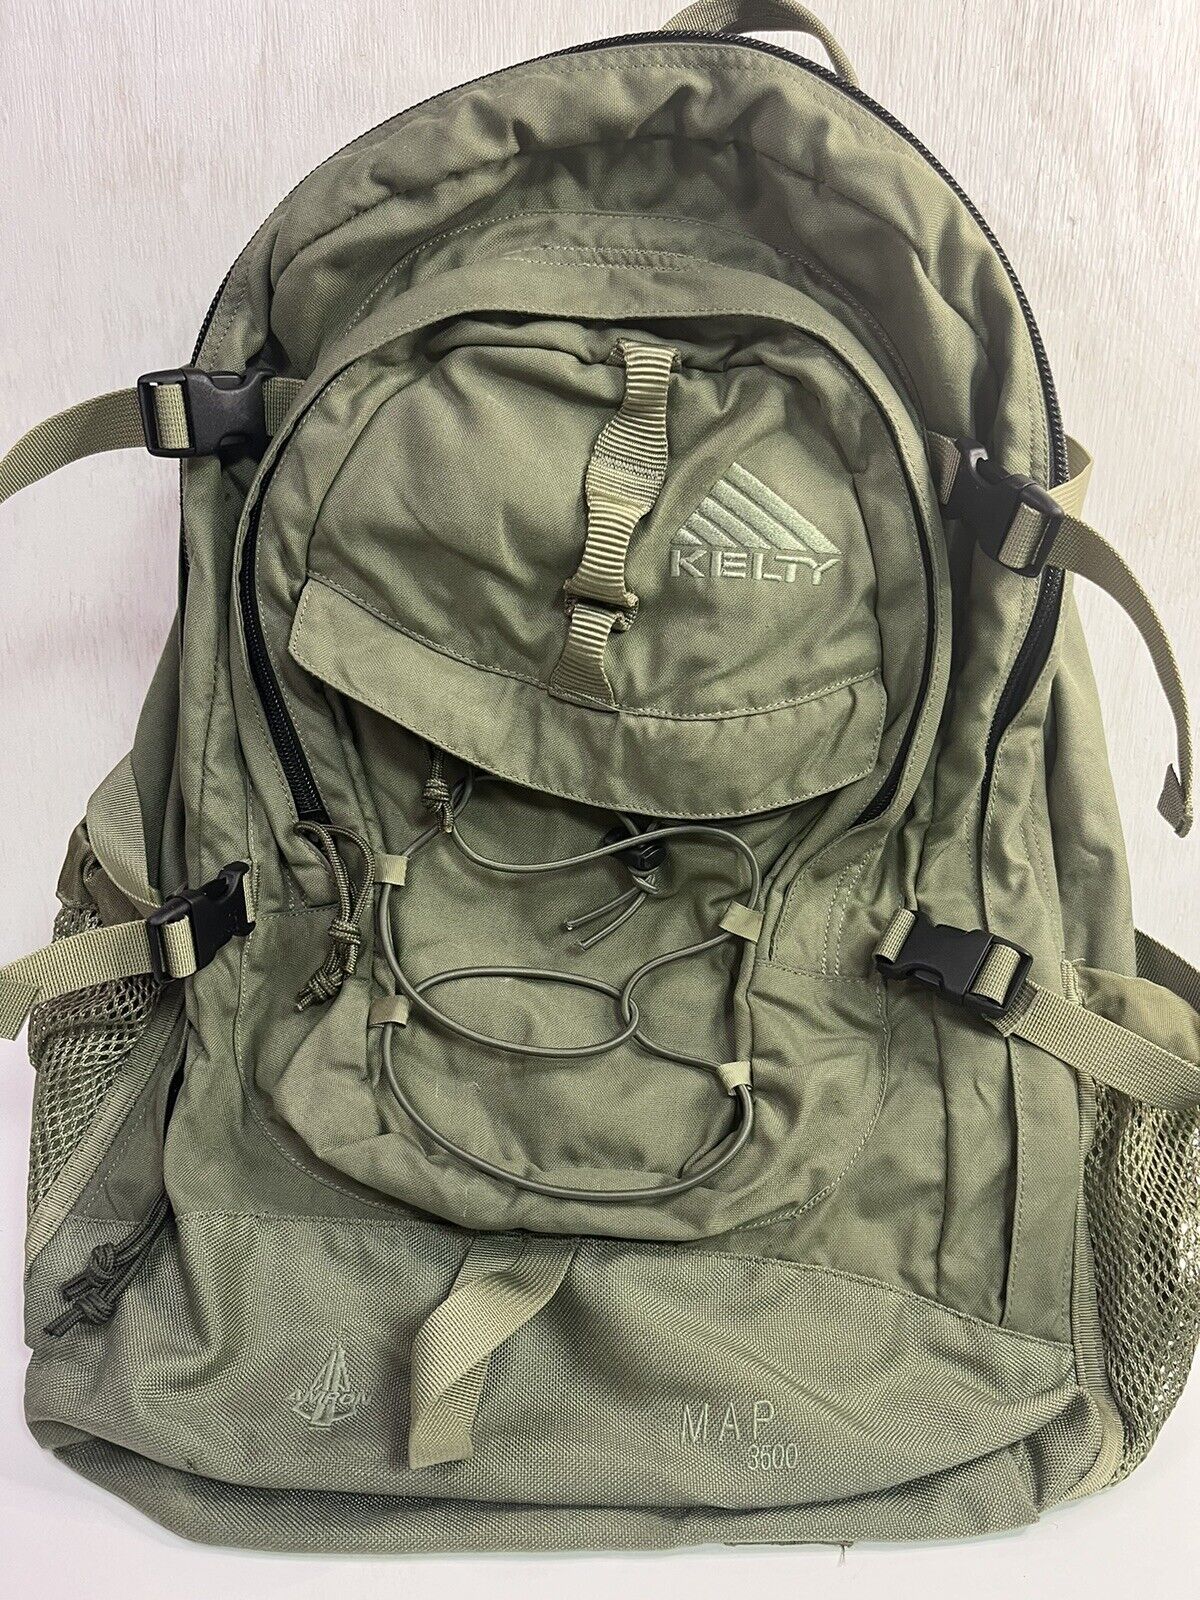 KELTY MAP 3500 AMRON MAP 3 Day Assault Pack US Navy Seals RARE GREEN BACKPACK